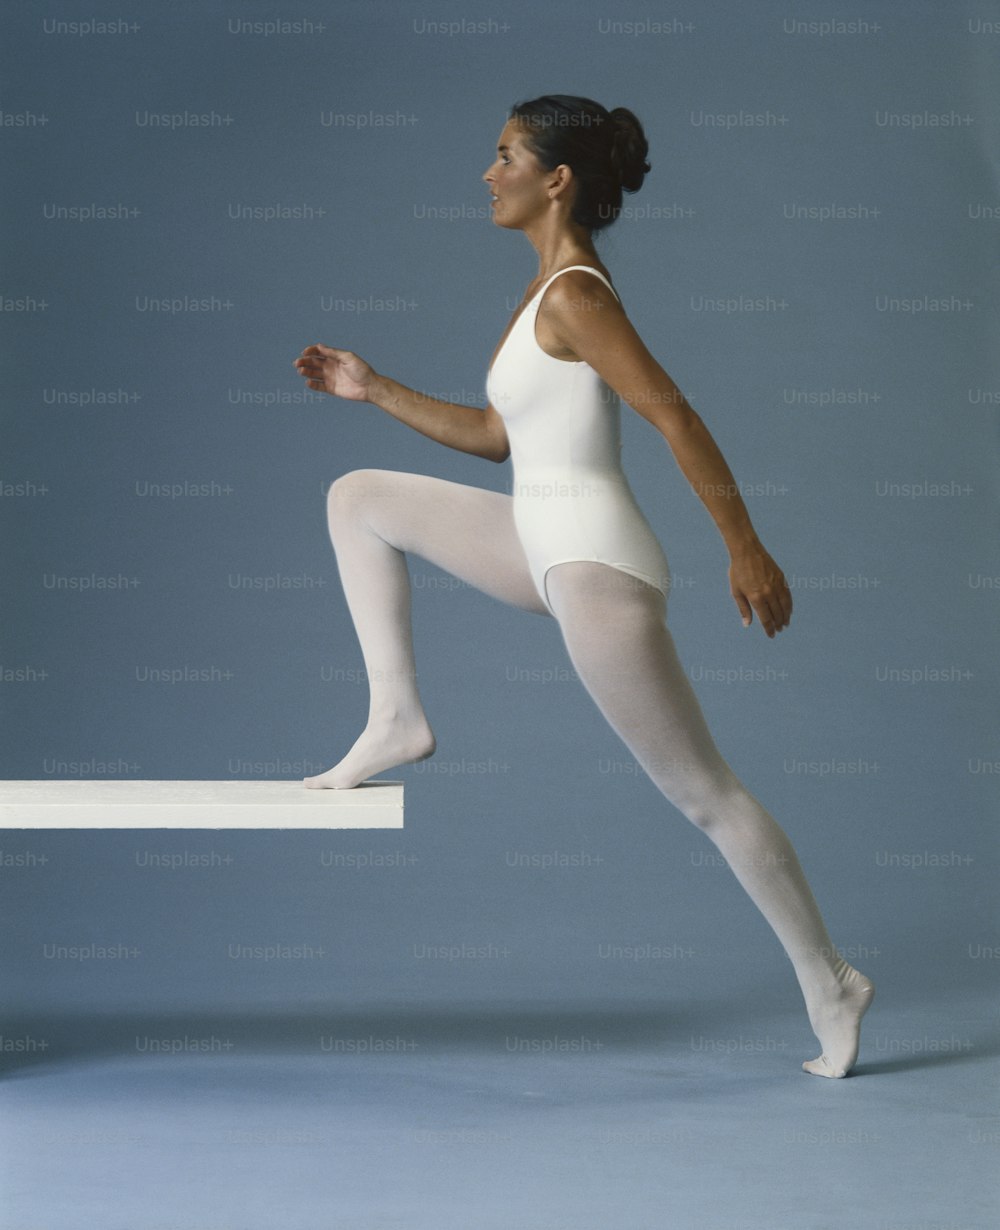 a woman in a white leotard jumping over a ledge